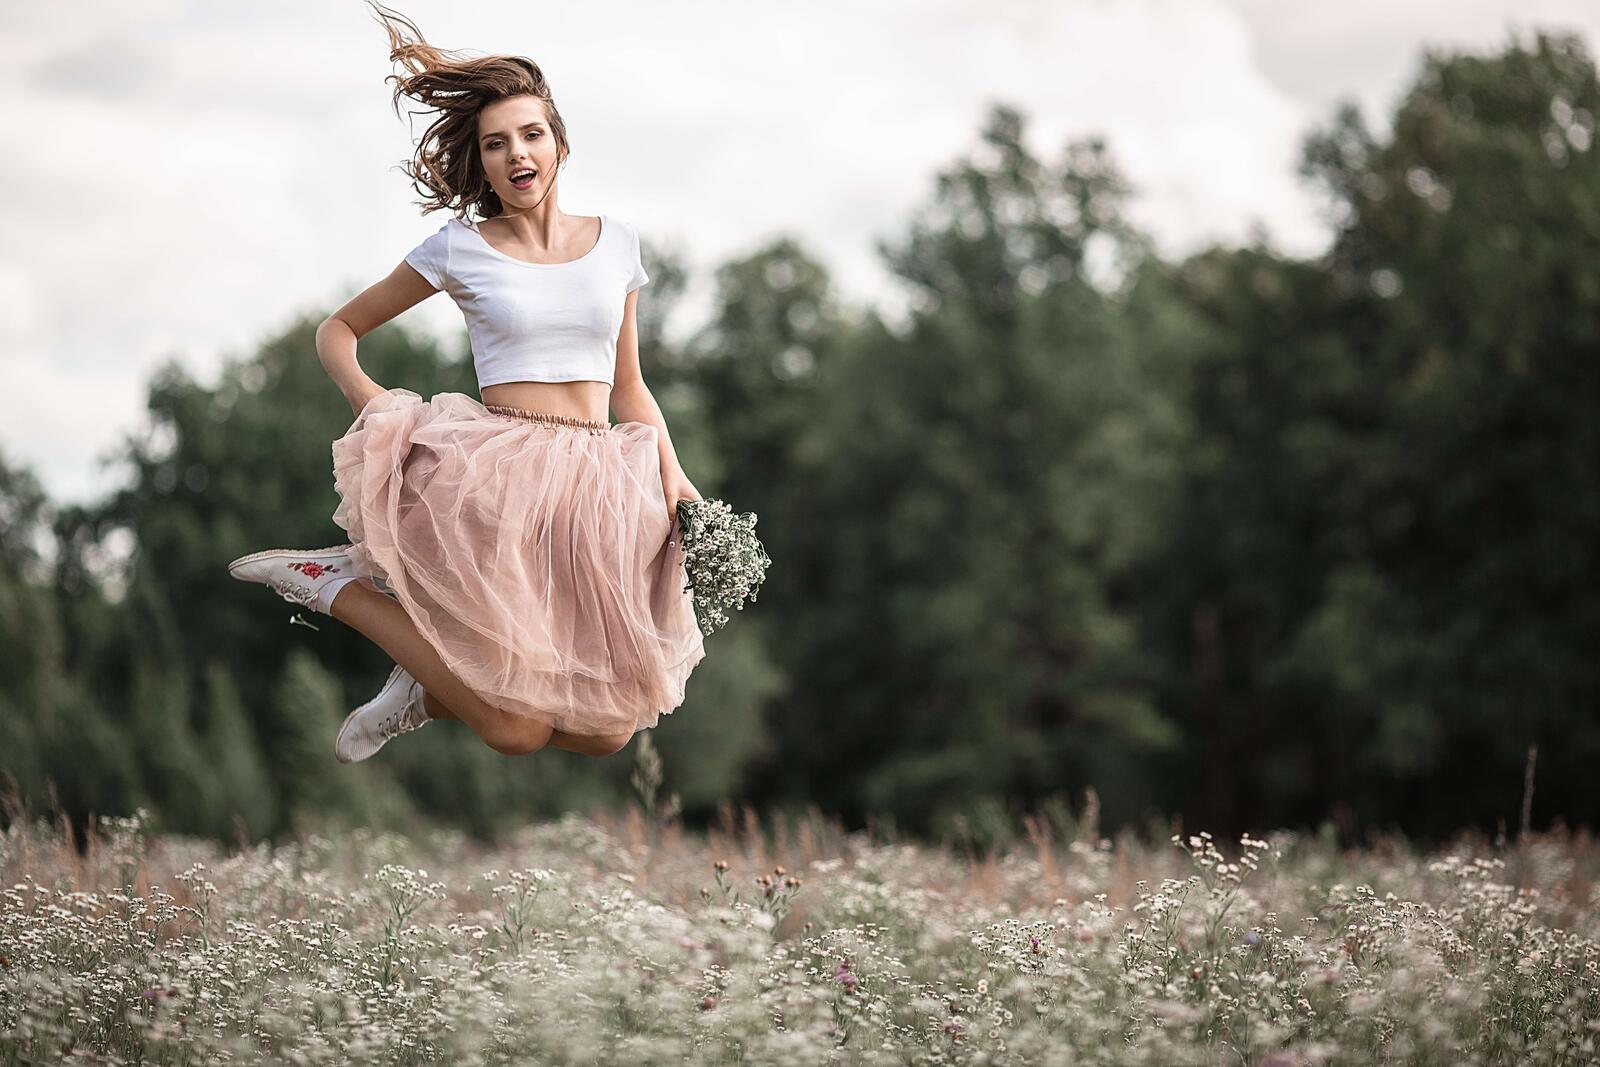 Free photo Girl photographed jumping in a flower field